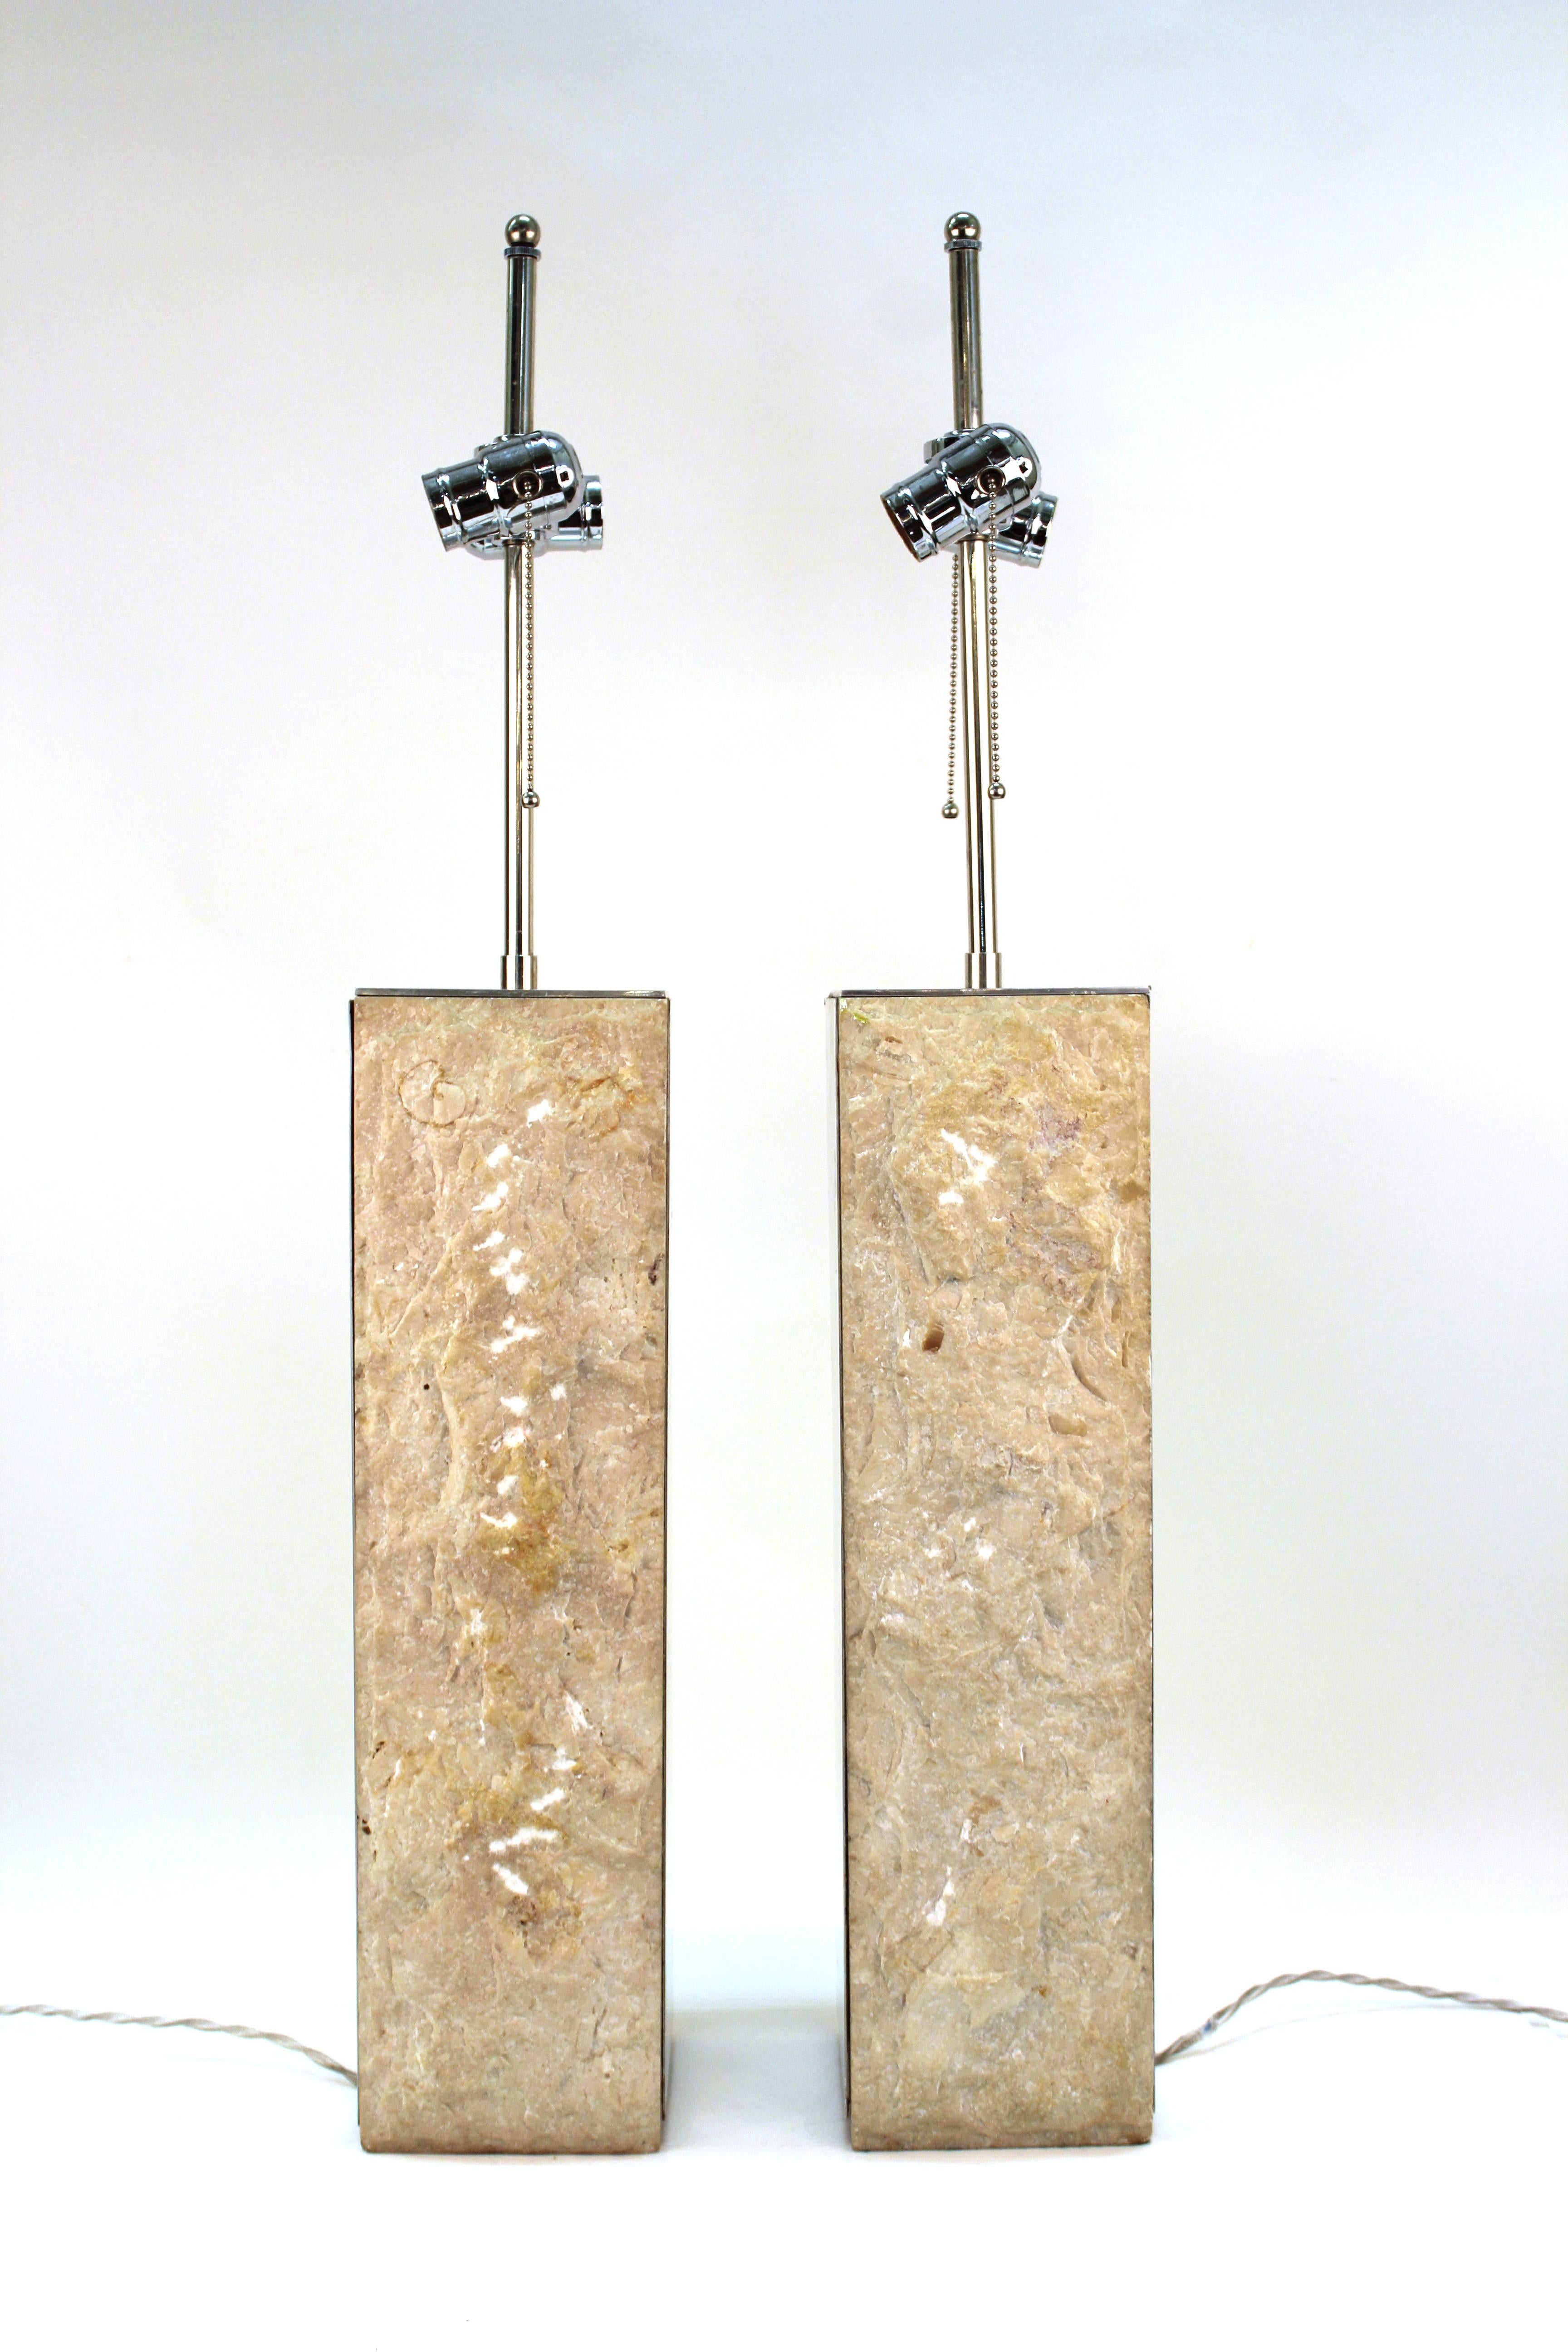 Modern Brutalist style pair of table lamps with metal structure and stone elements on the sides. Made in the United States during the 1970s-1980s. One lamp has a dent to the metal on one upper corner and a chip to the stone panel. In good vintage